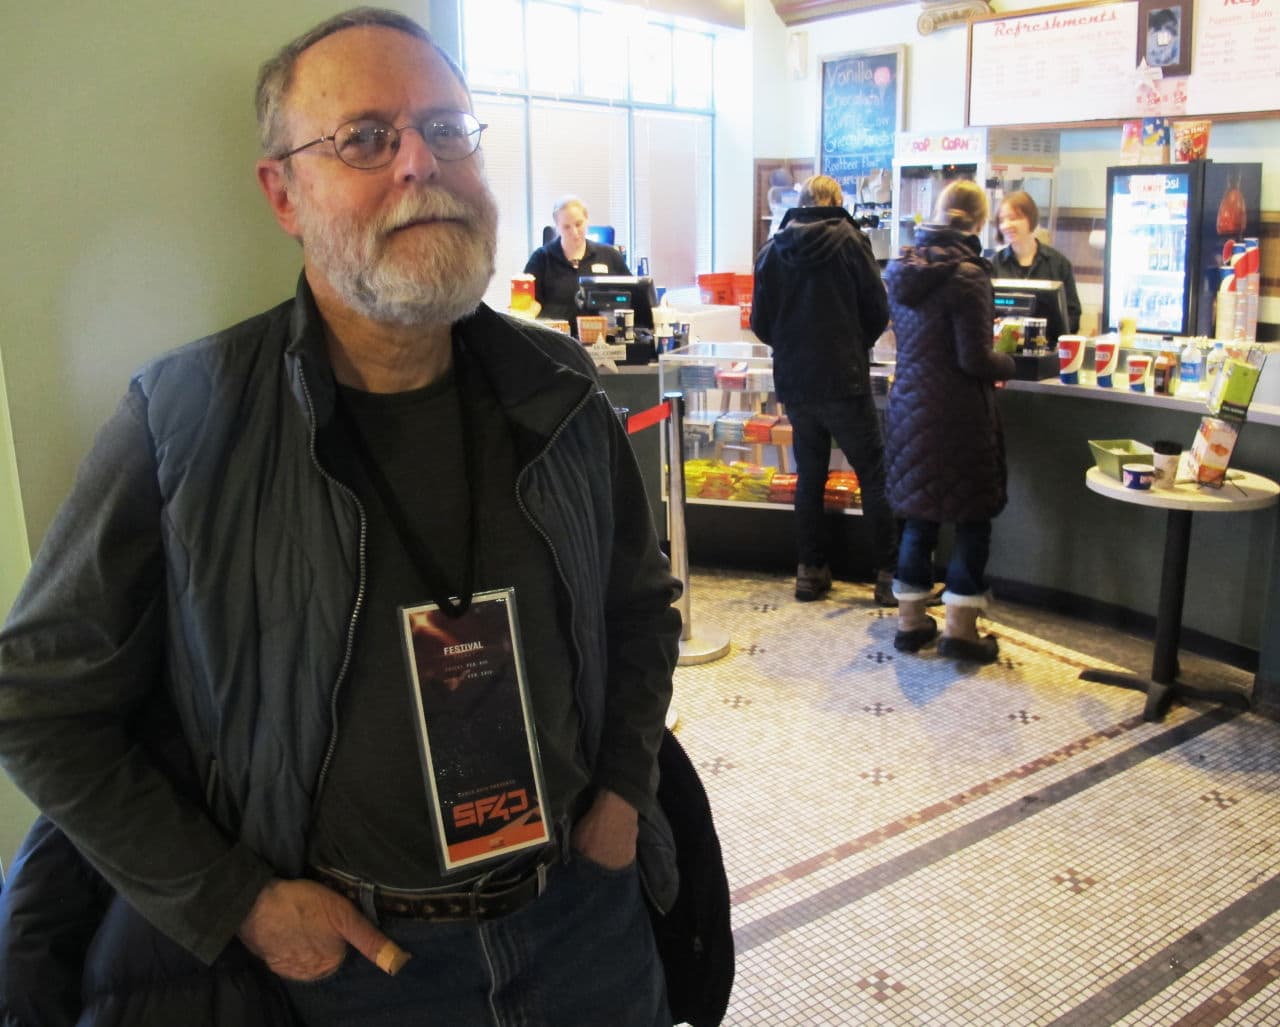 Paul Rubin of Lexington has been coming to Boston's Sci-fi Festival for 30 to 35 years. (Courtesy)